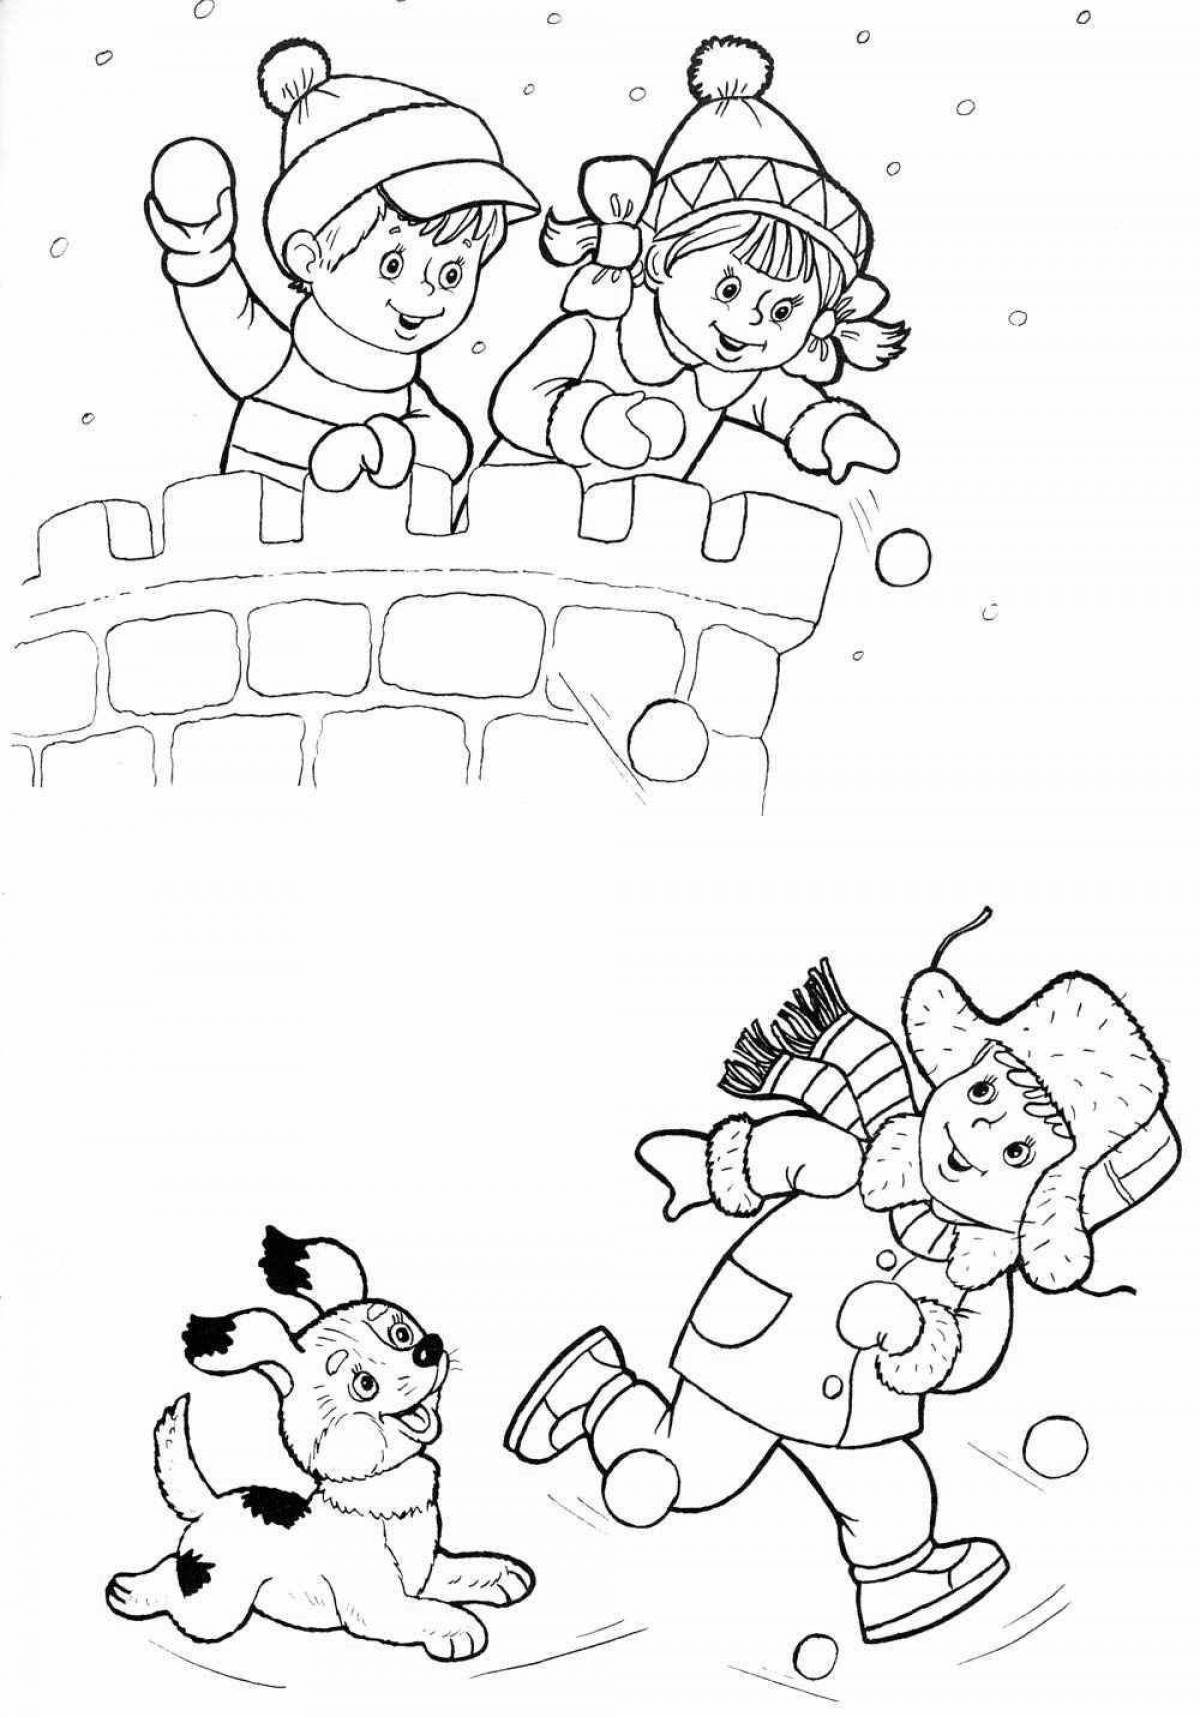 Shiny winter funny coloring book